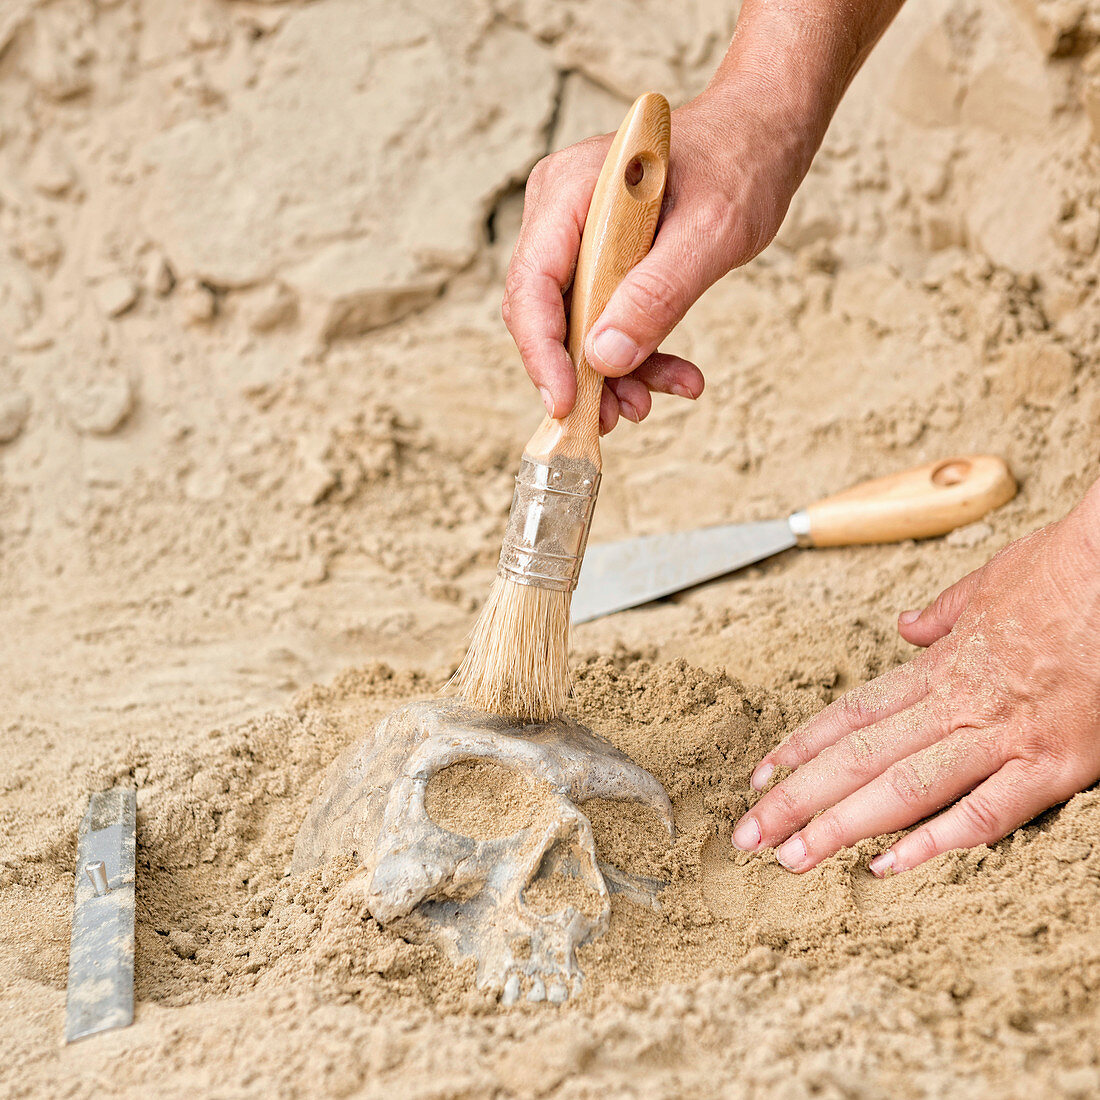 Archaeologist excavating a skull